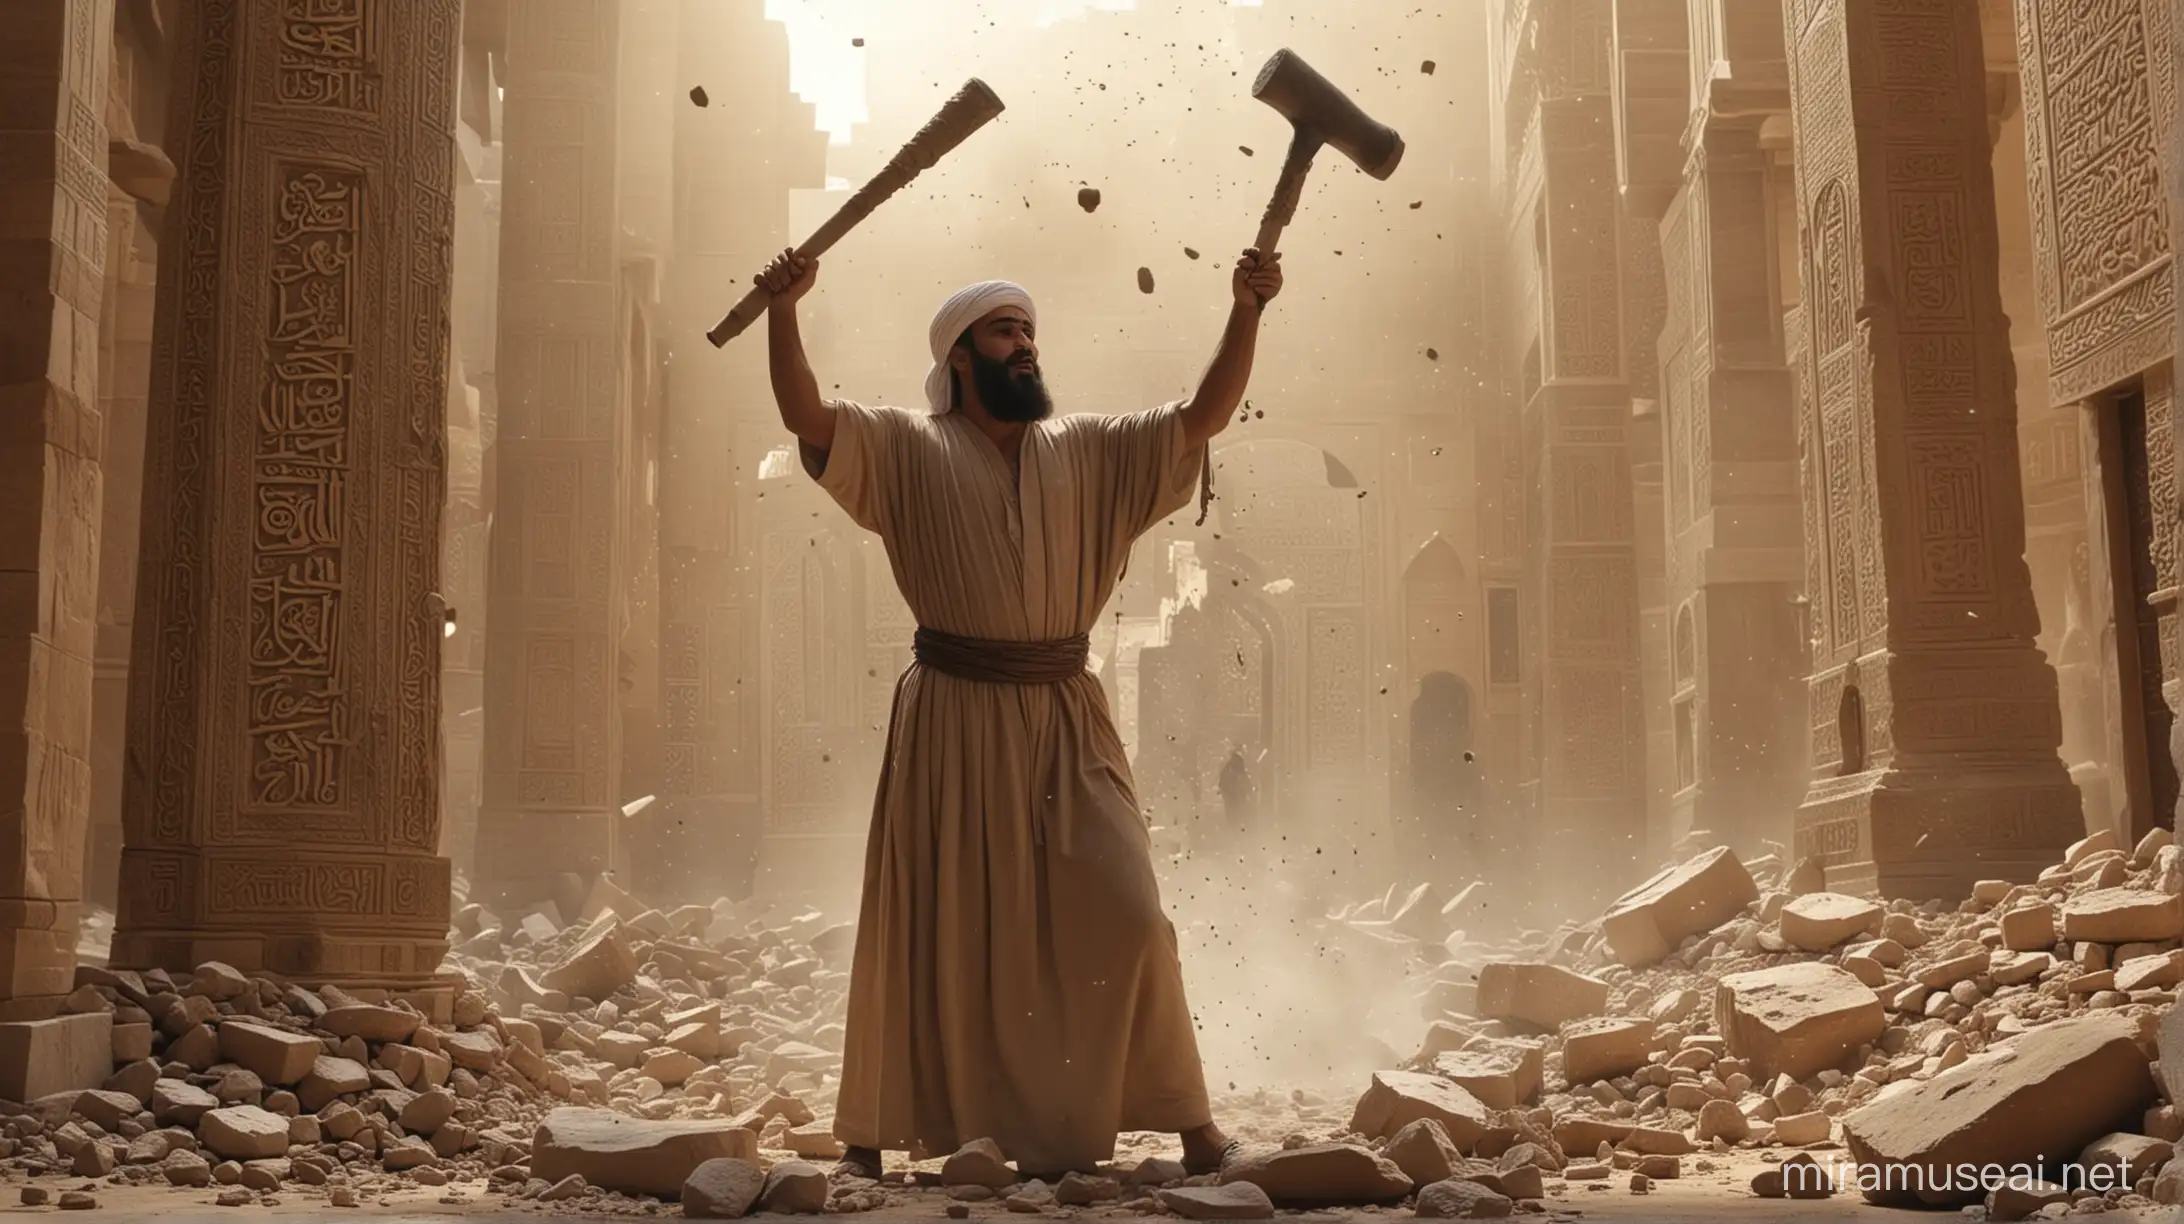 Prophet Ibrahim ( عليه السلام) Smashes the Idols: A powerful and dramatic scene of Ibrahim ( عليه السلام) swinging a hammer, shattering idols in a temple. The air is filled with dust and debris, symbolizing the breaking of false idols. 4k HD